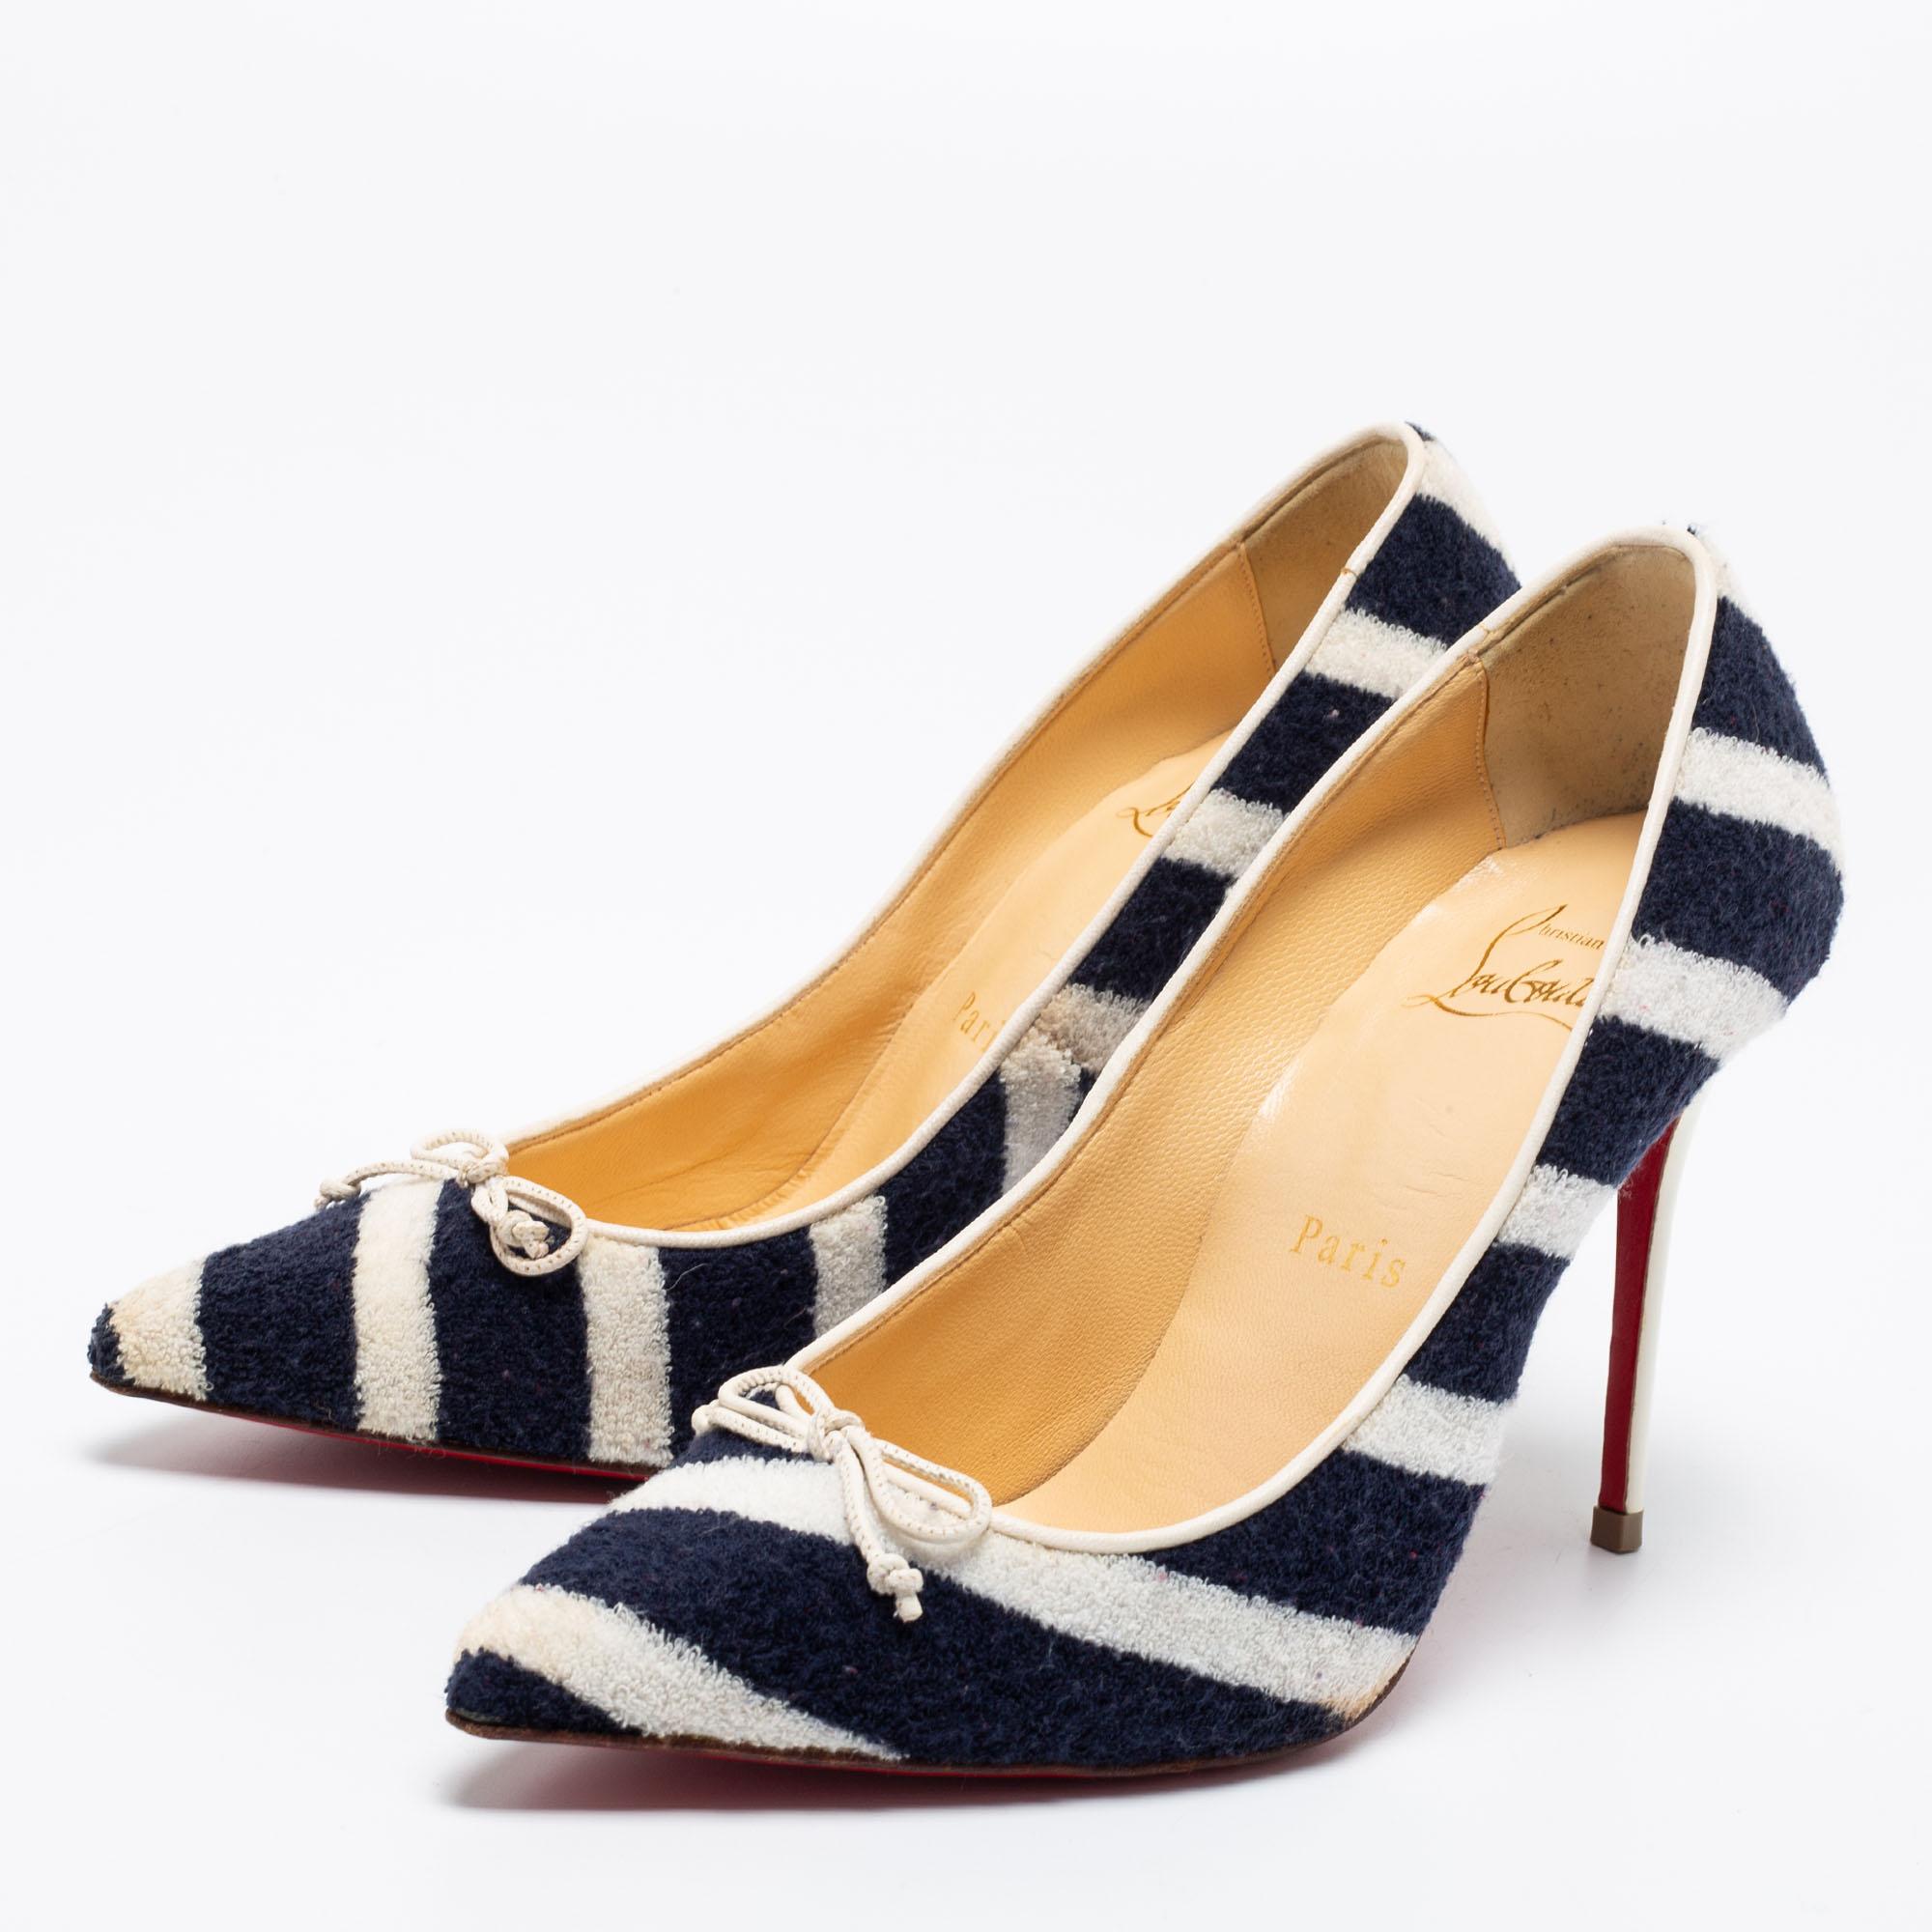 Project an elegant take in a comfortable manner with these timeless pumps by Christian Louboutin. Crafted fabric in navy blue and white stripes, they feature pointed toes and 9.5 cm heels.

Includes:
Original Dustbag, Original Box